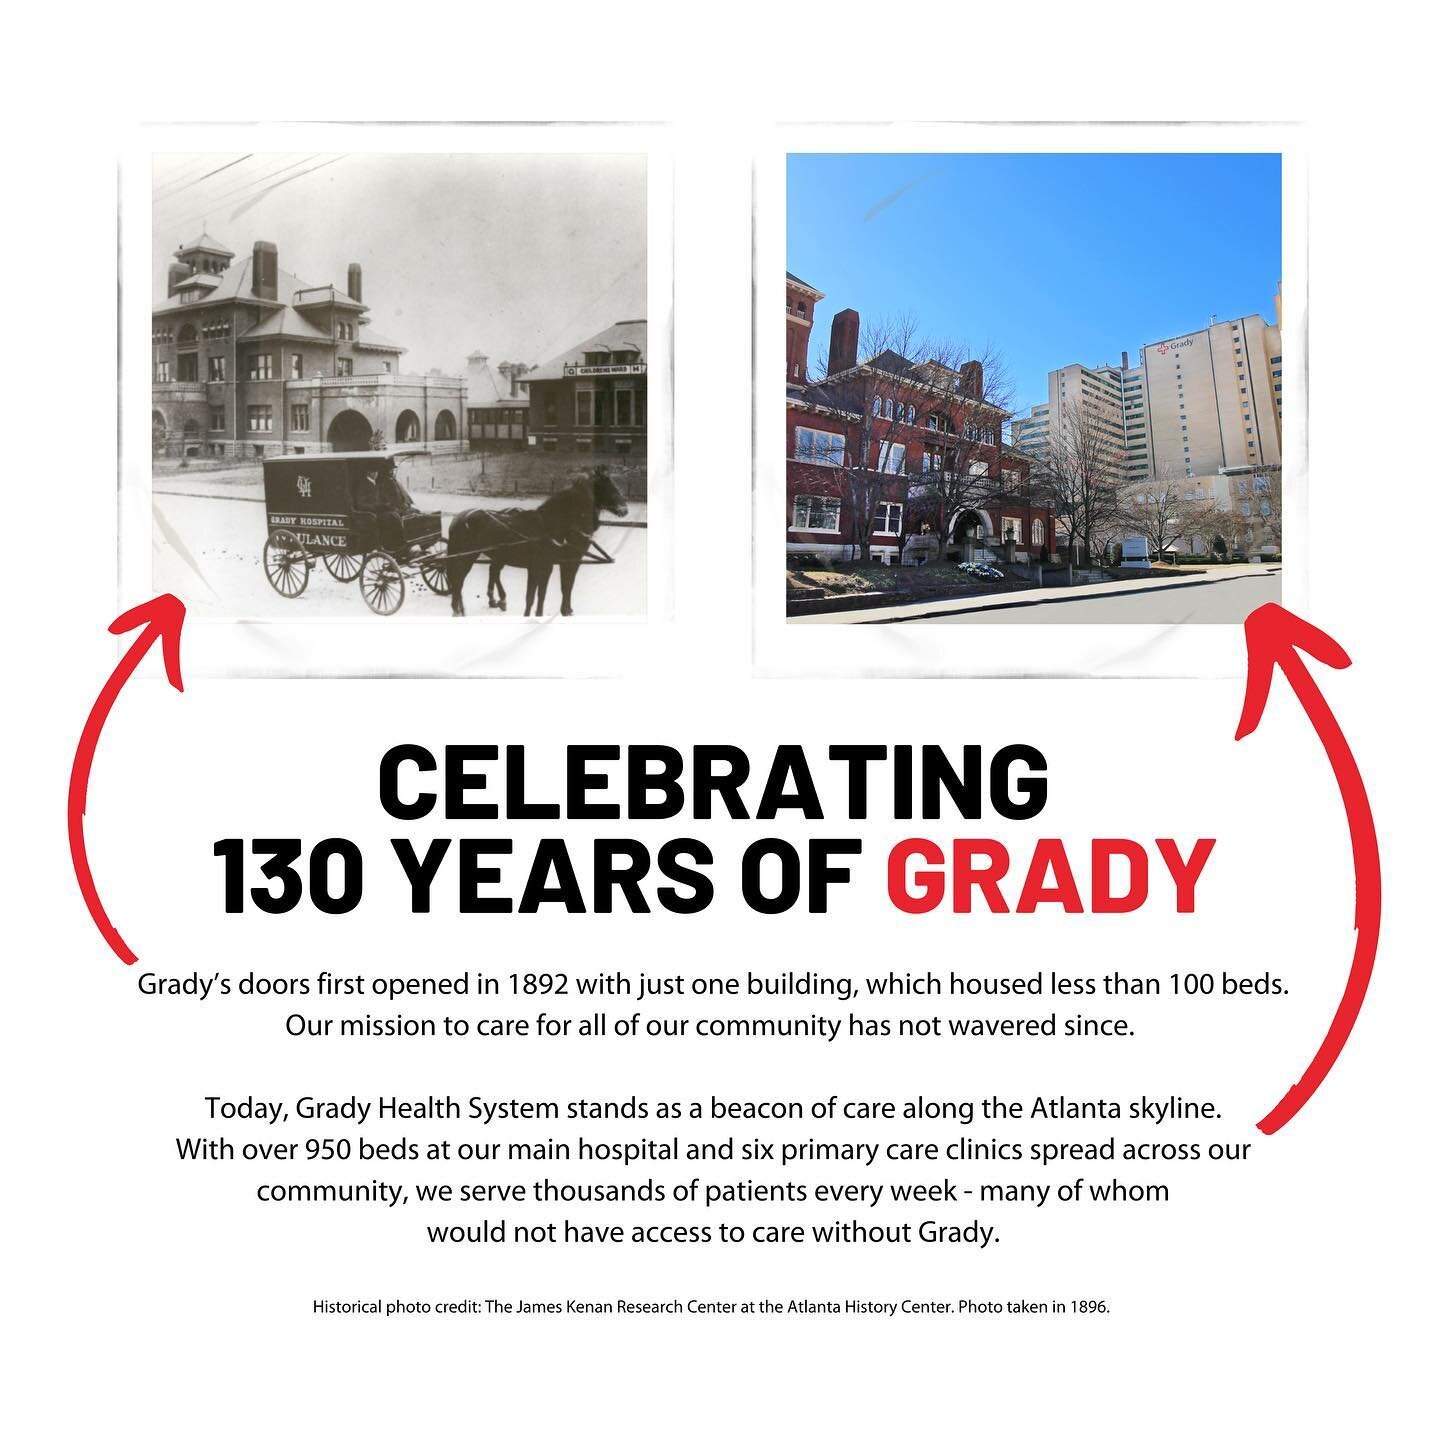 On this day, 130 years ago, Grady Memorial Hospital opened and changed the course of health care in Atlanta and beyond.

&quot;I consider Grady hospital the grandest institution that was ever founded in Atlanta. It will nurse the poor and rich alike 